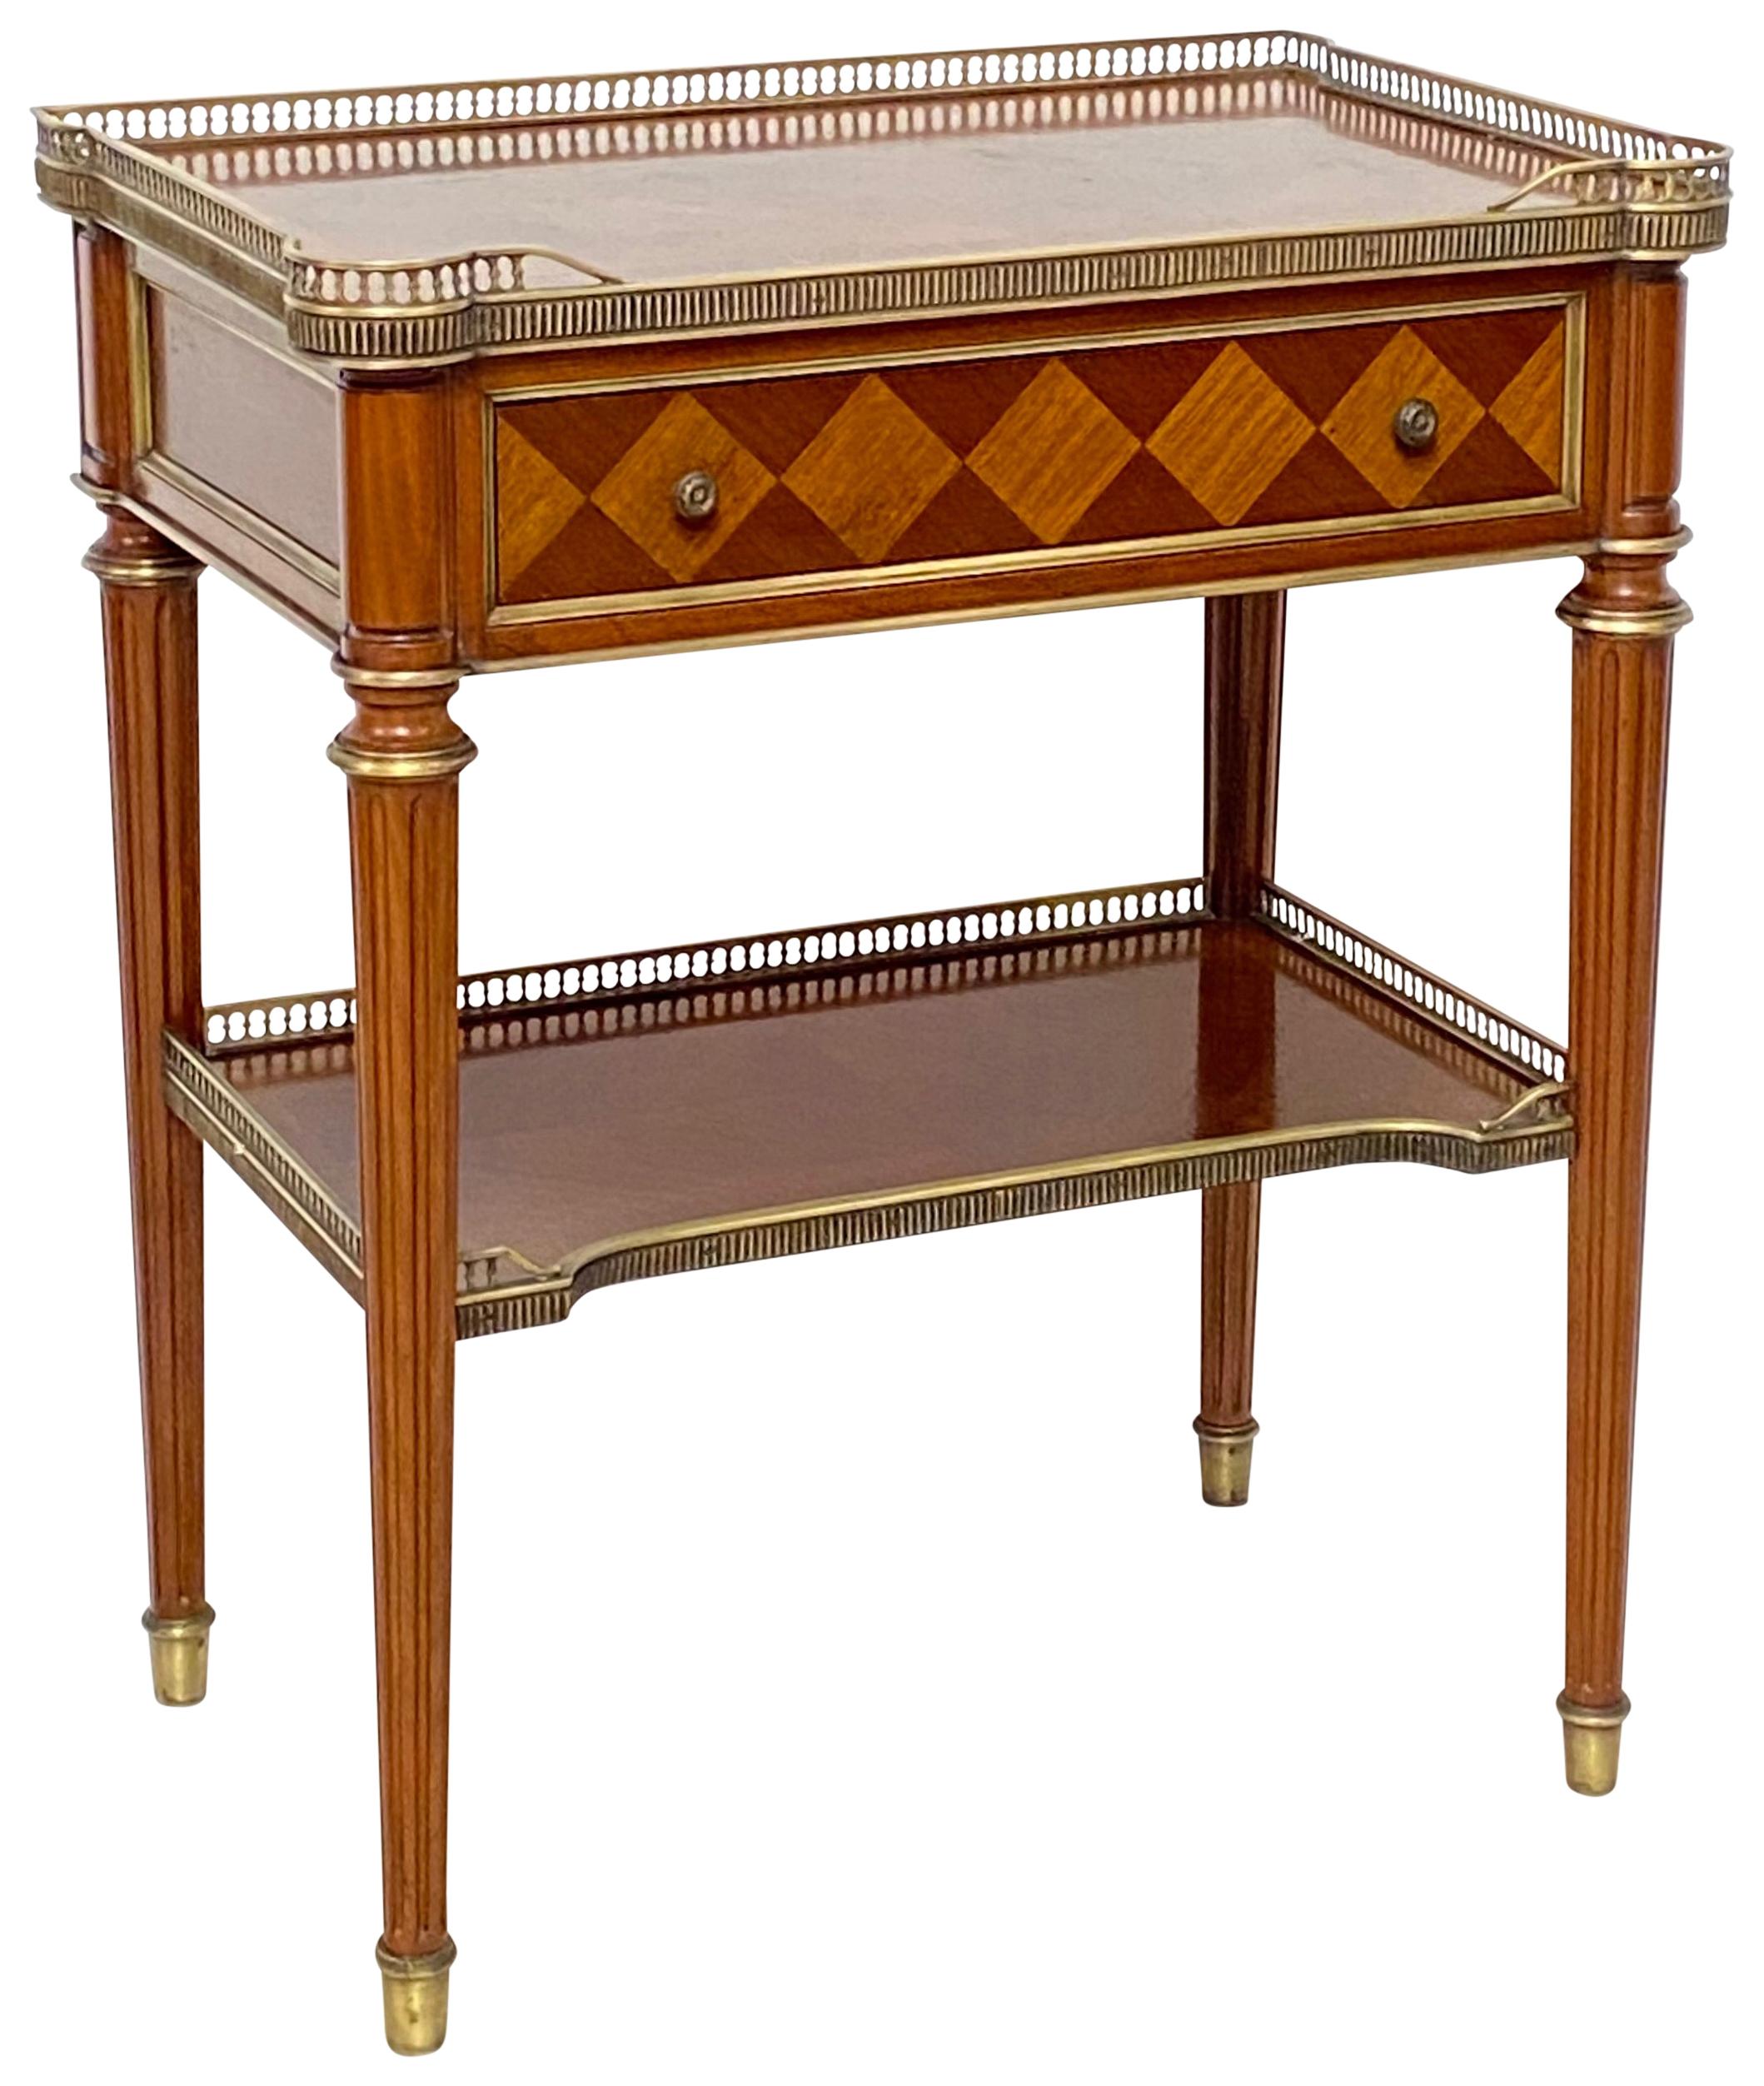 A fine quality beautifully made solid mahogany and book matched mahogany veneer low table, having a brass gallery, trim and hardware.
France, circa 1950.

 